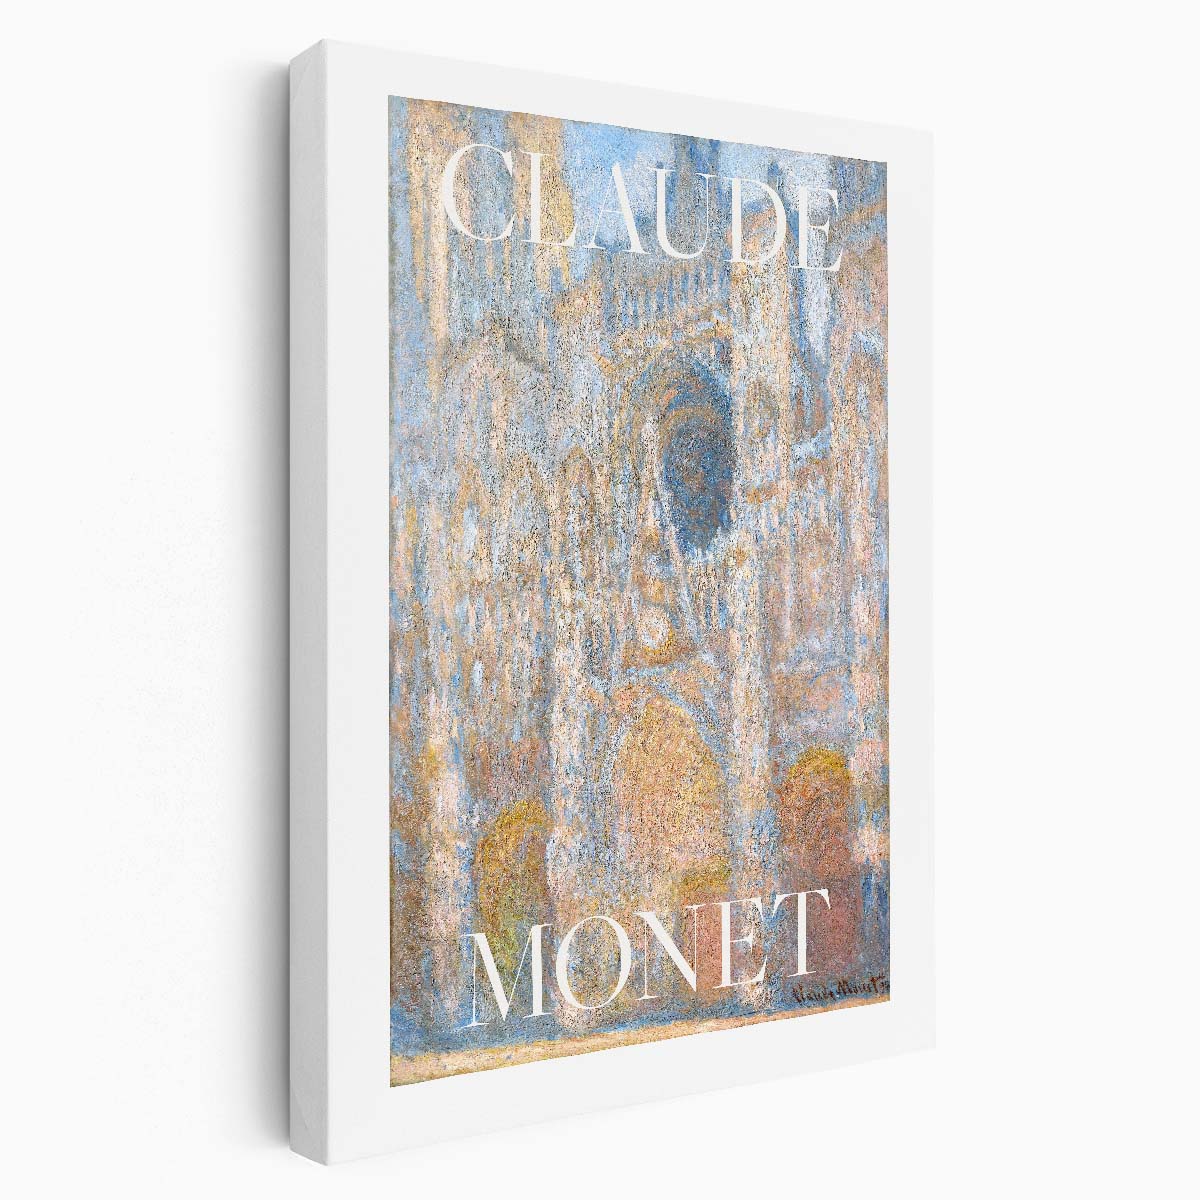 Claude Monet's Cour d'Albane Oil Painting Illustration Poster by Luxuriance Designs, made in USA